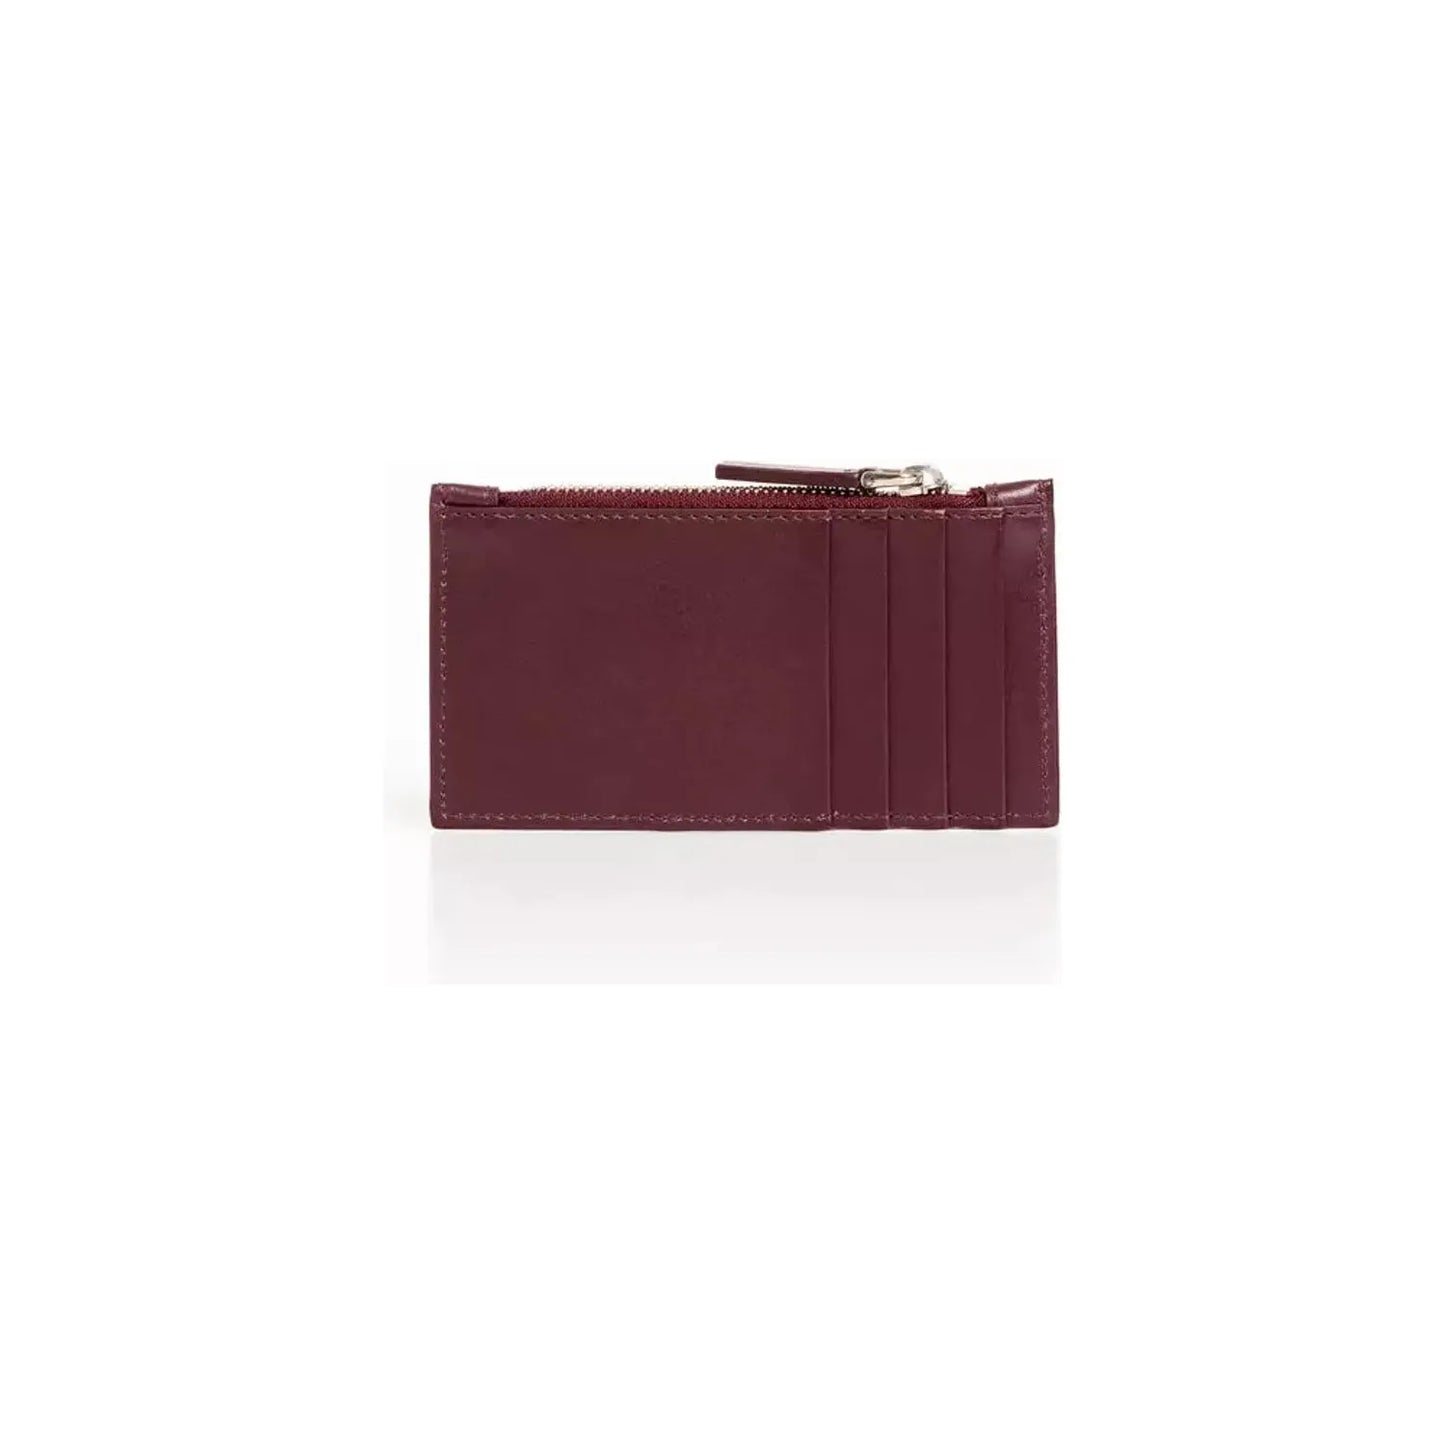 Trussardi Elegant Soft Leather Card Holder in Rich Brown r-wallet-6 Wallet stock_product_image_21579_1058335590-24-67fea2cc-20d.webp